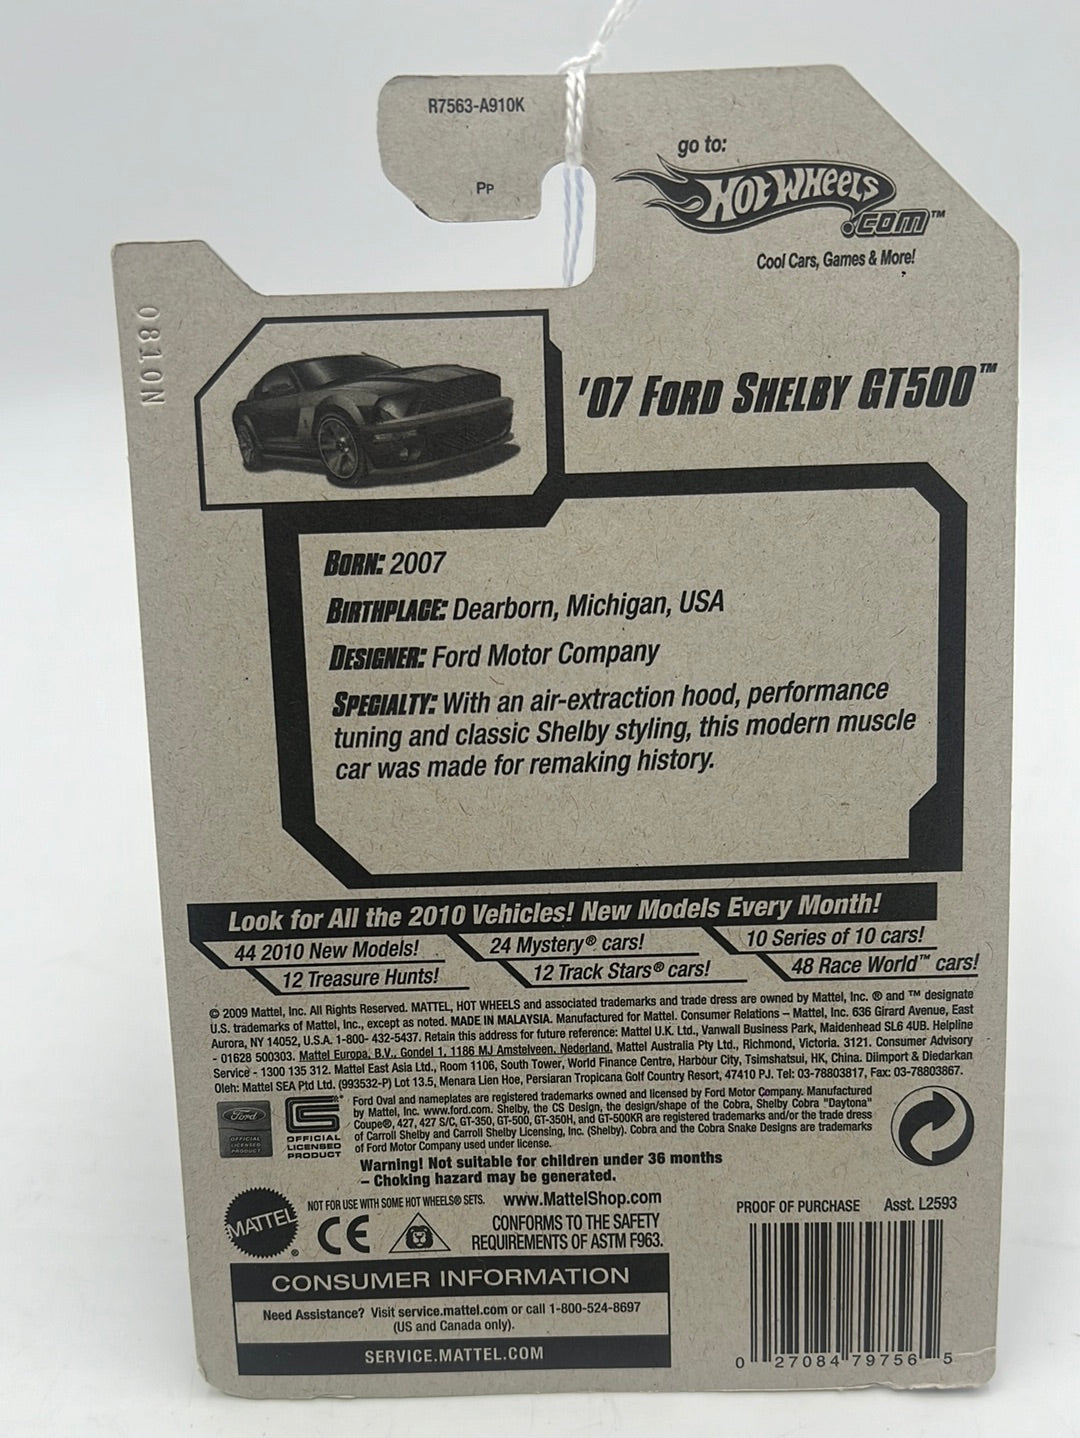 2010 Hot Wheels Faster Than Ever ‘07 Ford Shelby GT500 Maroon 138/240 26G